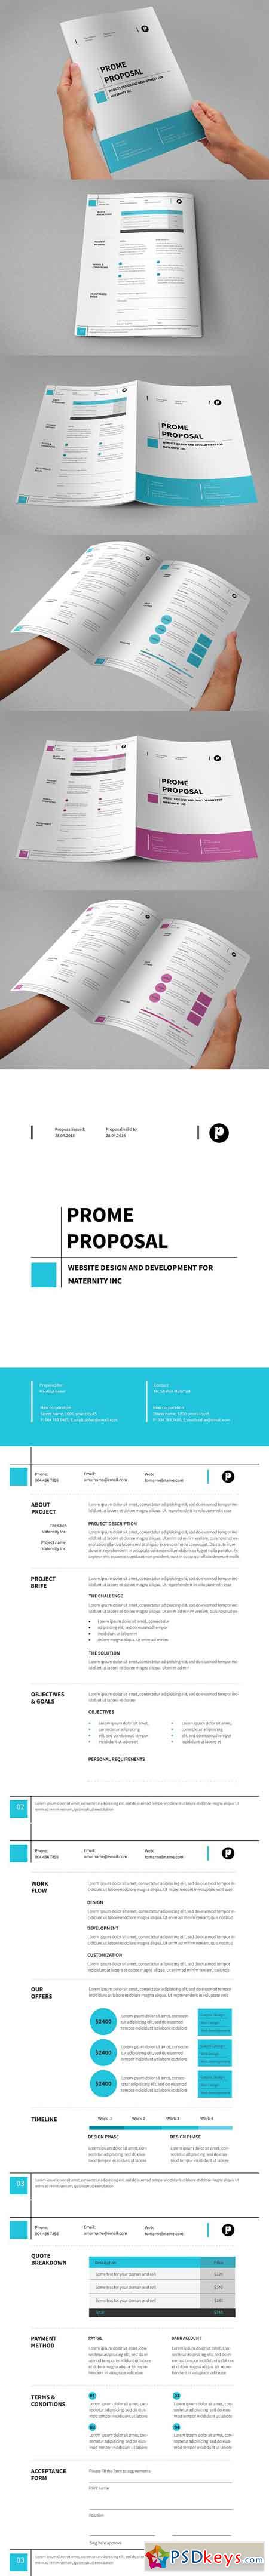 Proposal Template 02 2534455